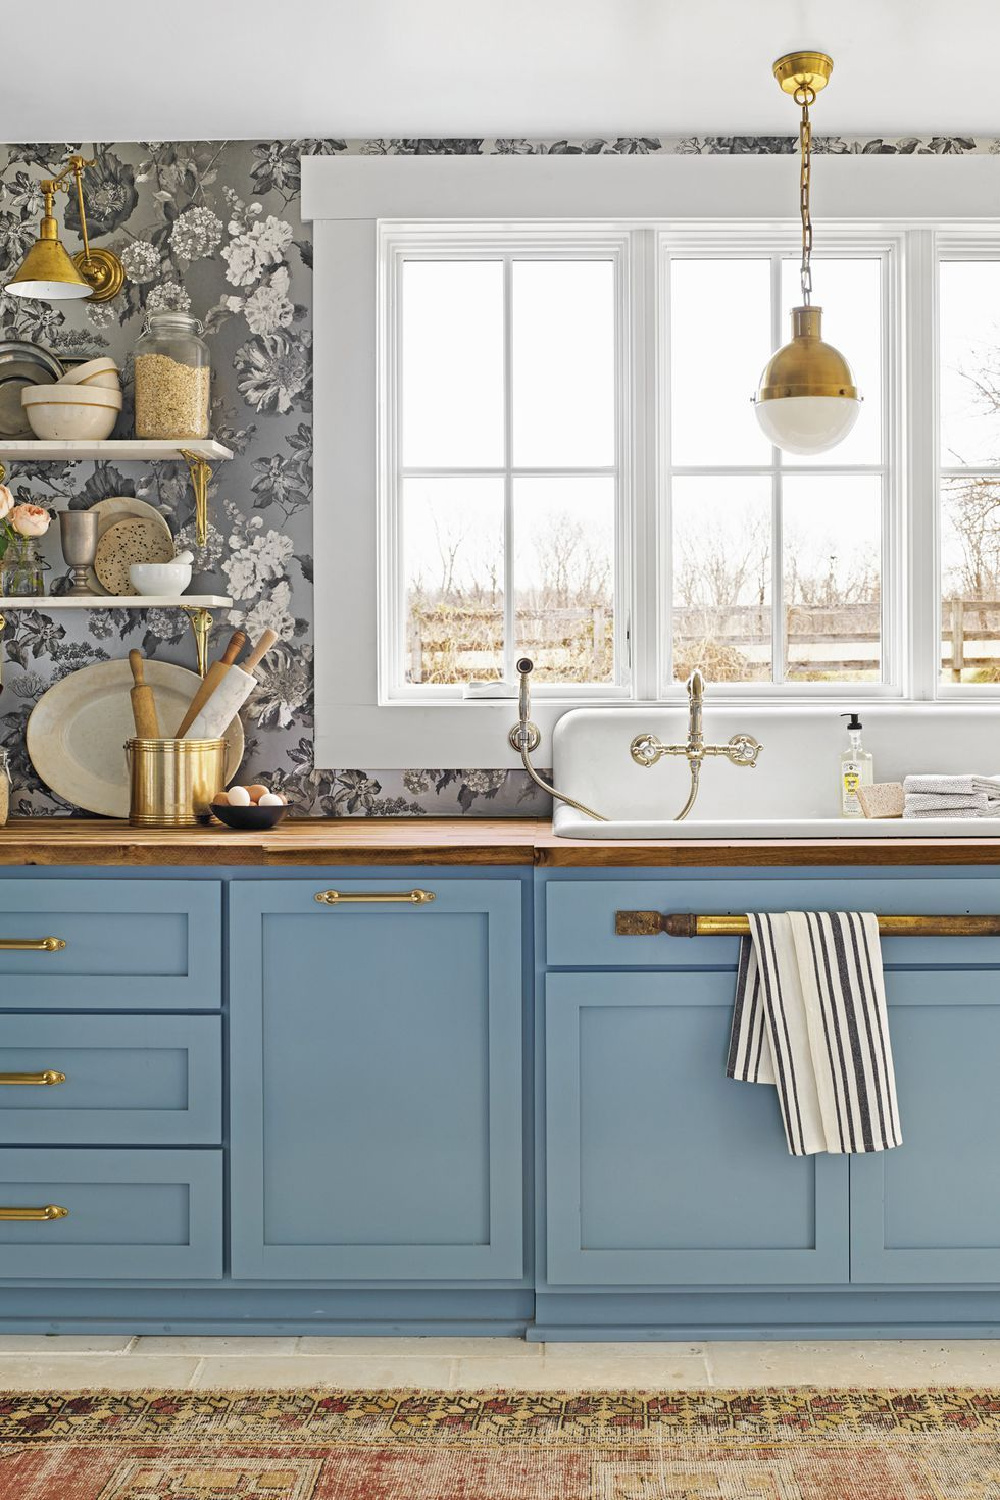 Holly Williams' beautiful blue Tennessee kitchen with blue cabinets and grey scenic wallpaper - photo by Annie Schlecter. #bluekitchens #modernfarmhouse